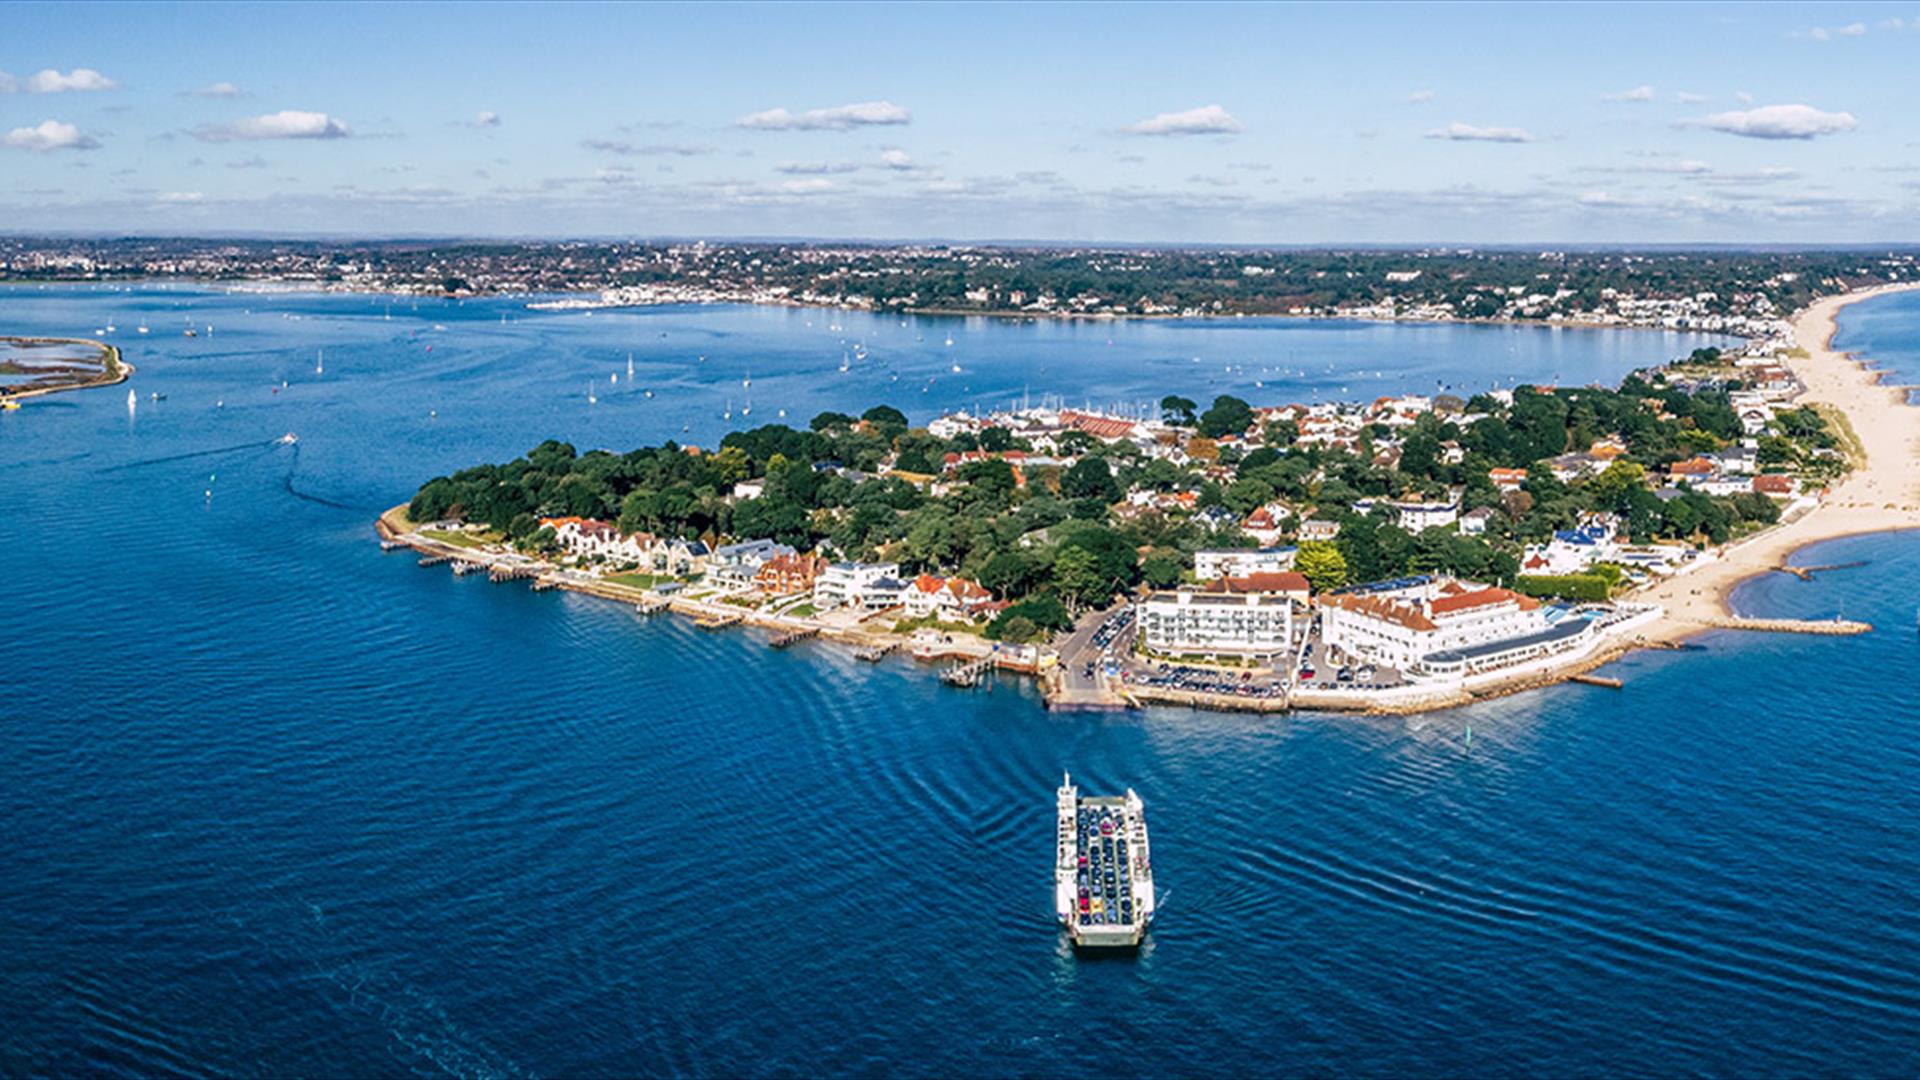 Aerial shot of Sandbanks in Poole on a beautiful sunny day with the ferry arriving to dock